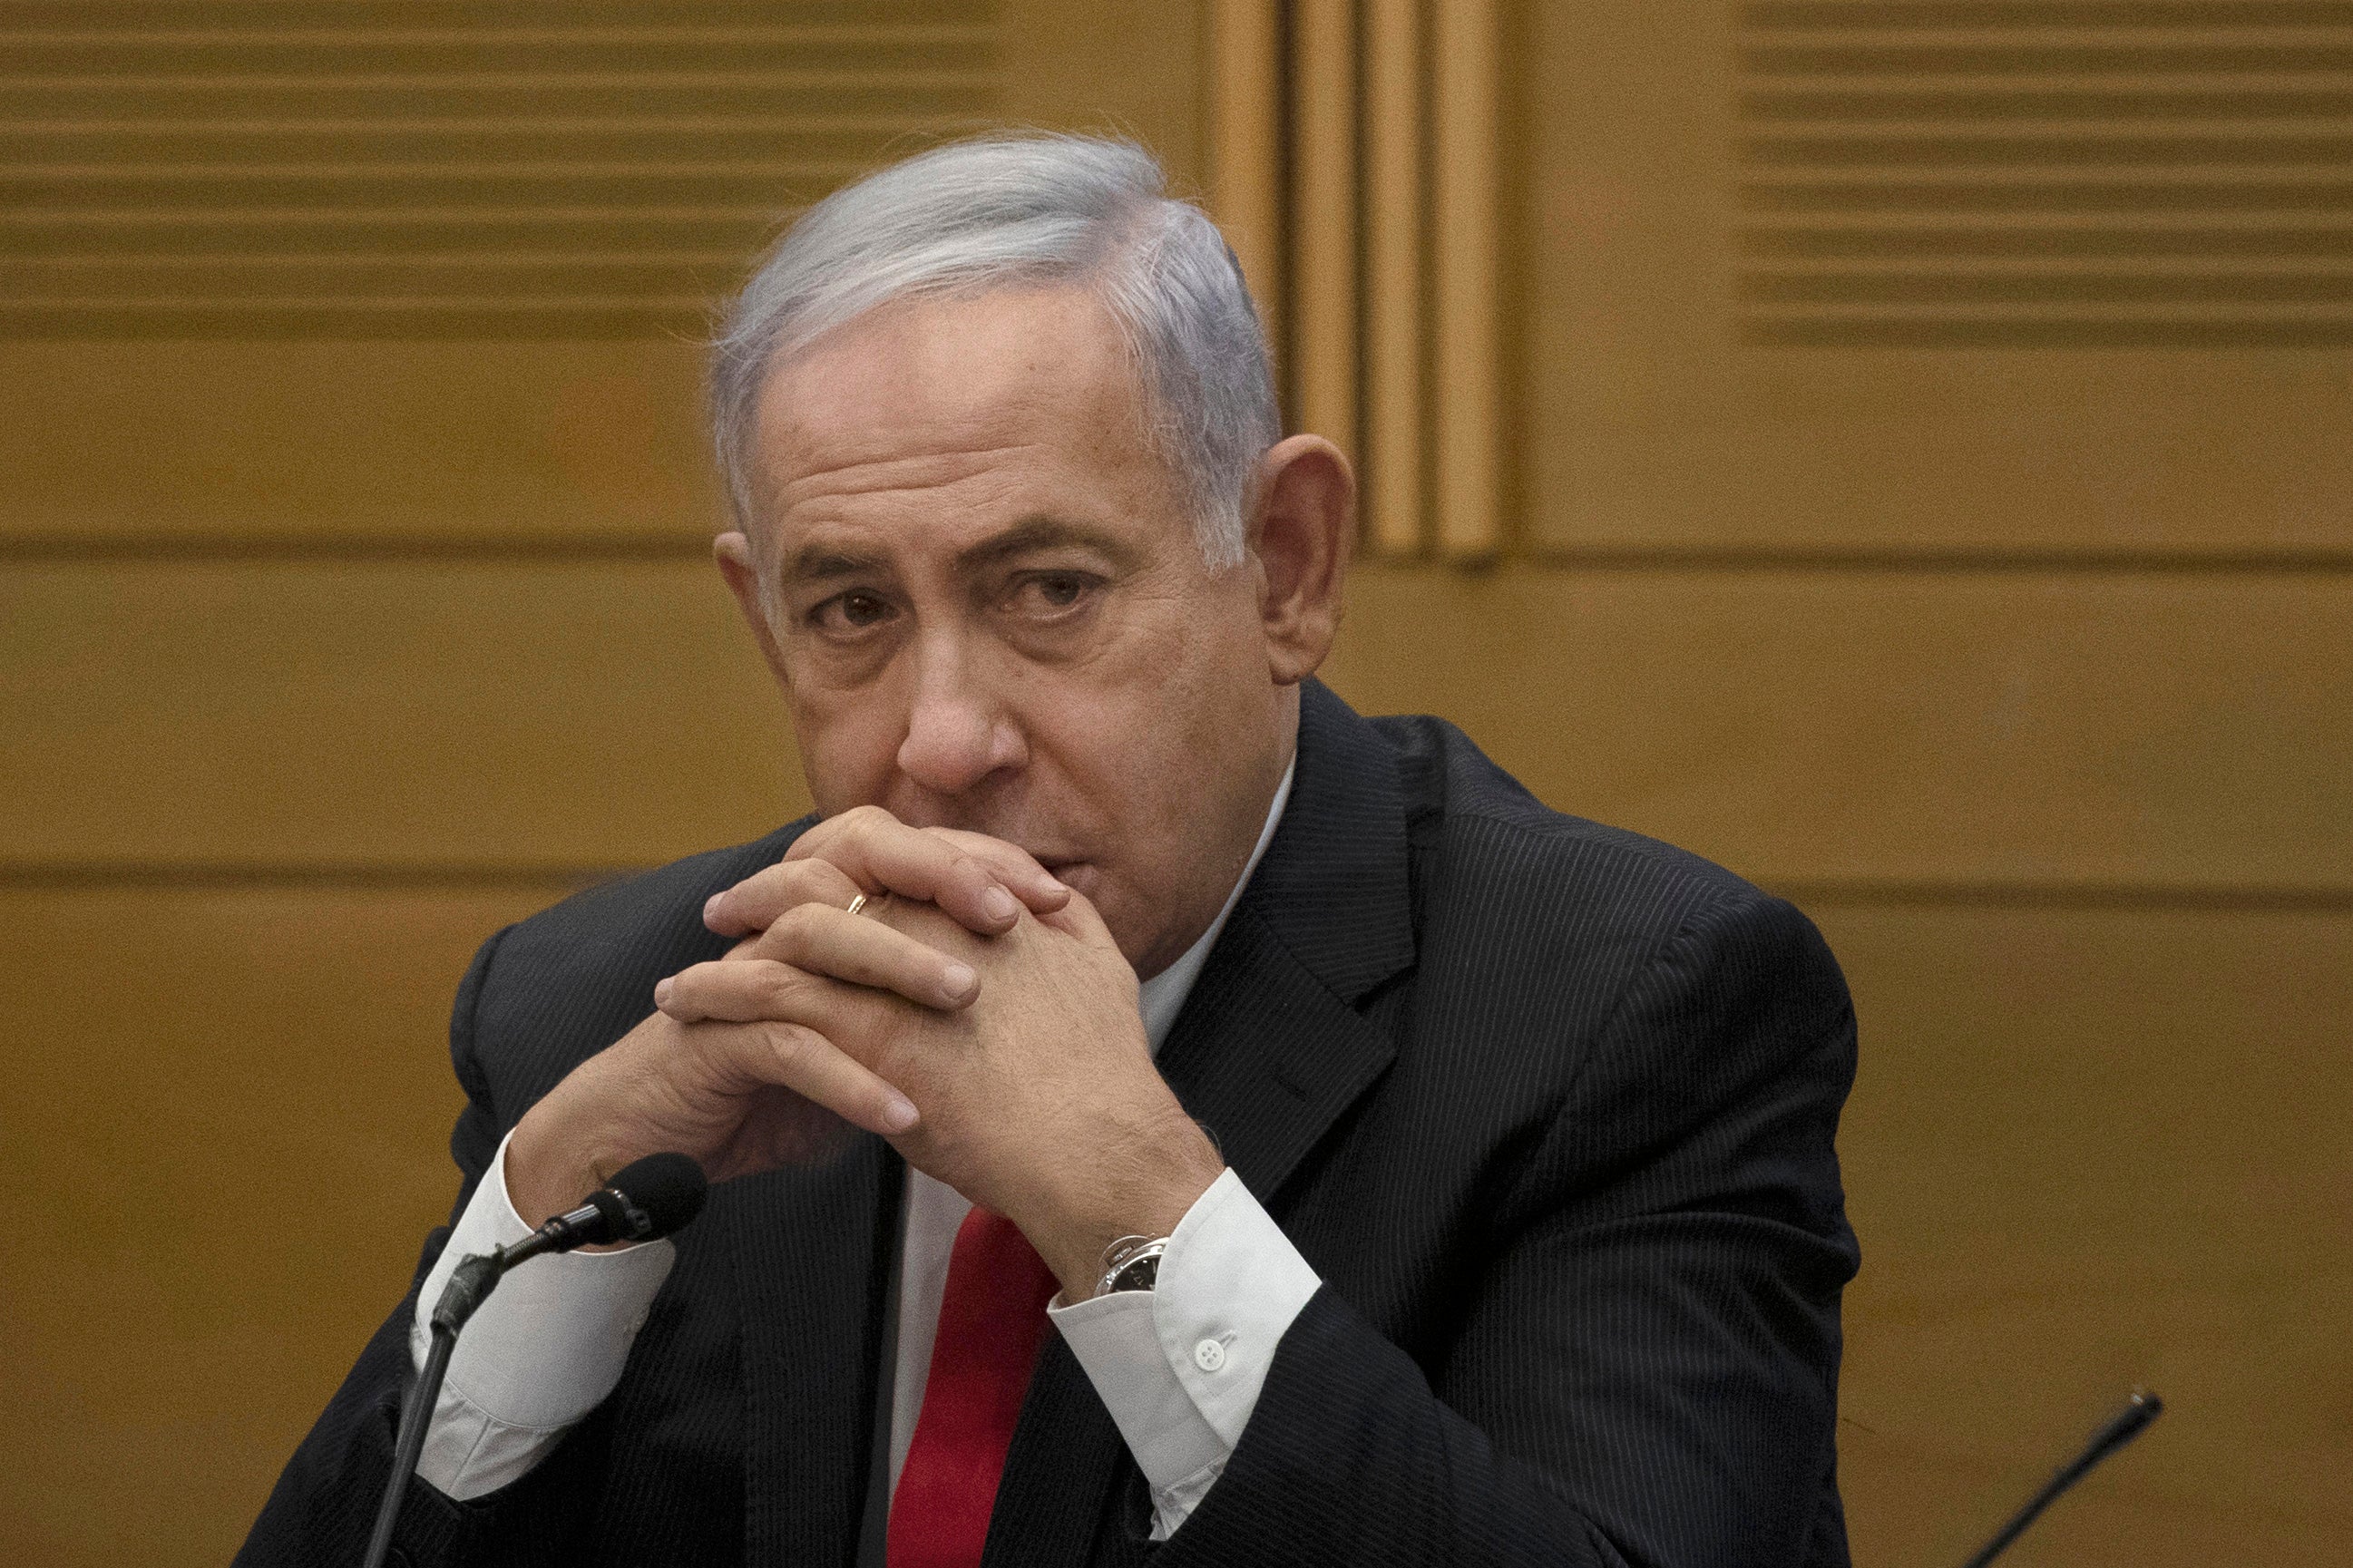 Israel’s Benjamin Netanyahu discharged from hospital following chest pains